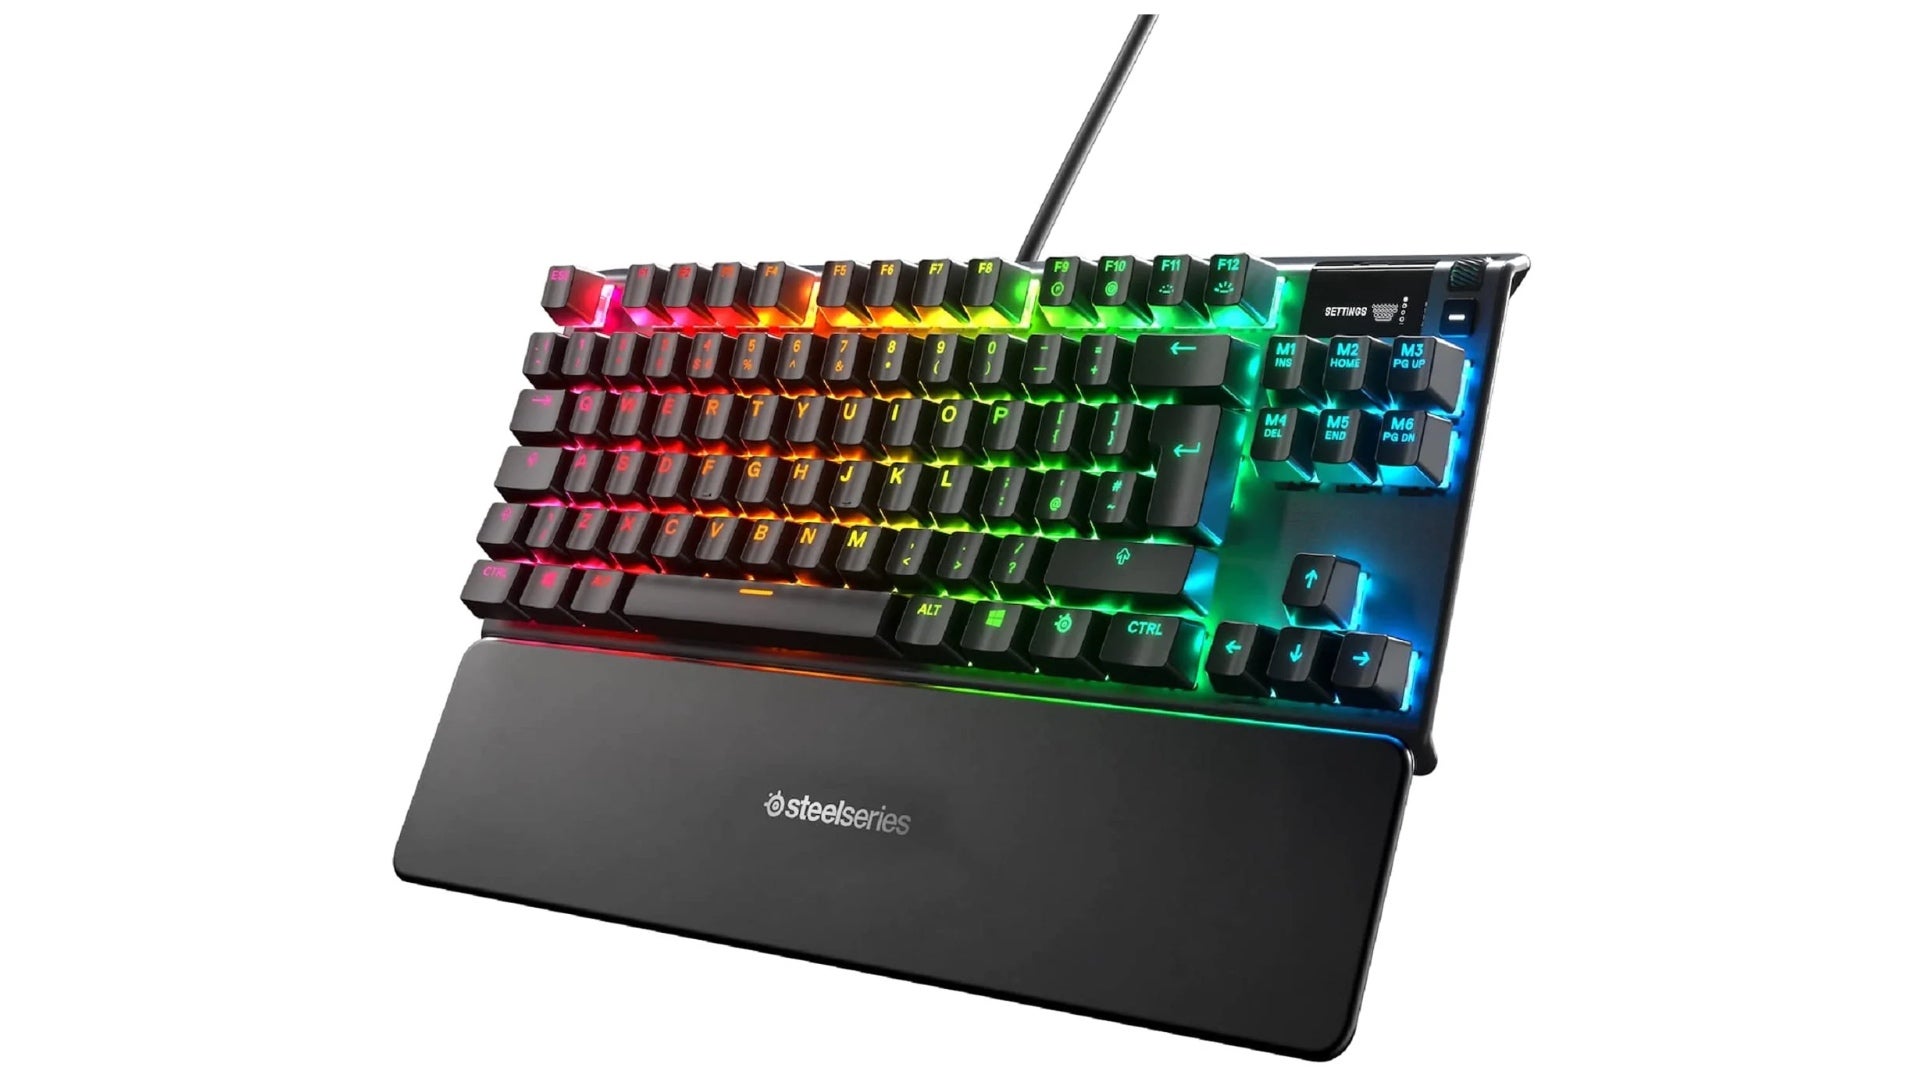 Save £99 on a SteelSeries Apex Pro TKL keyboard in this early